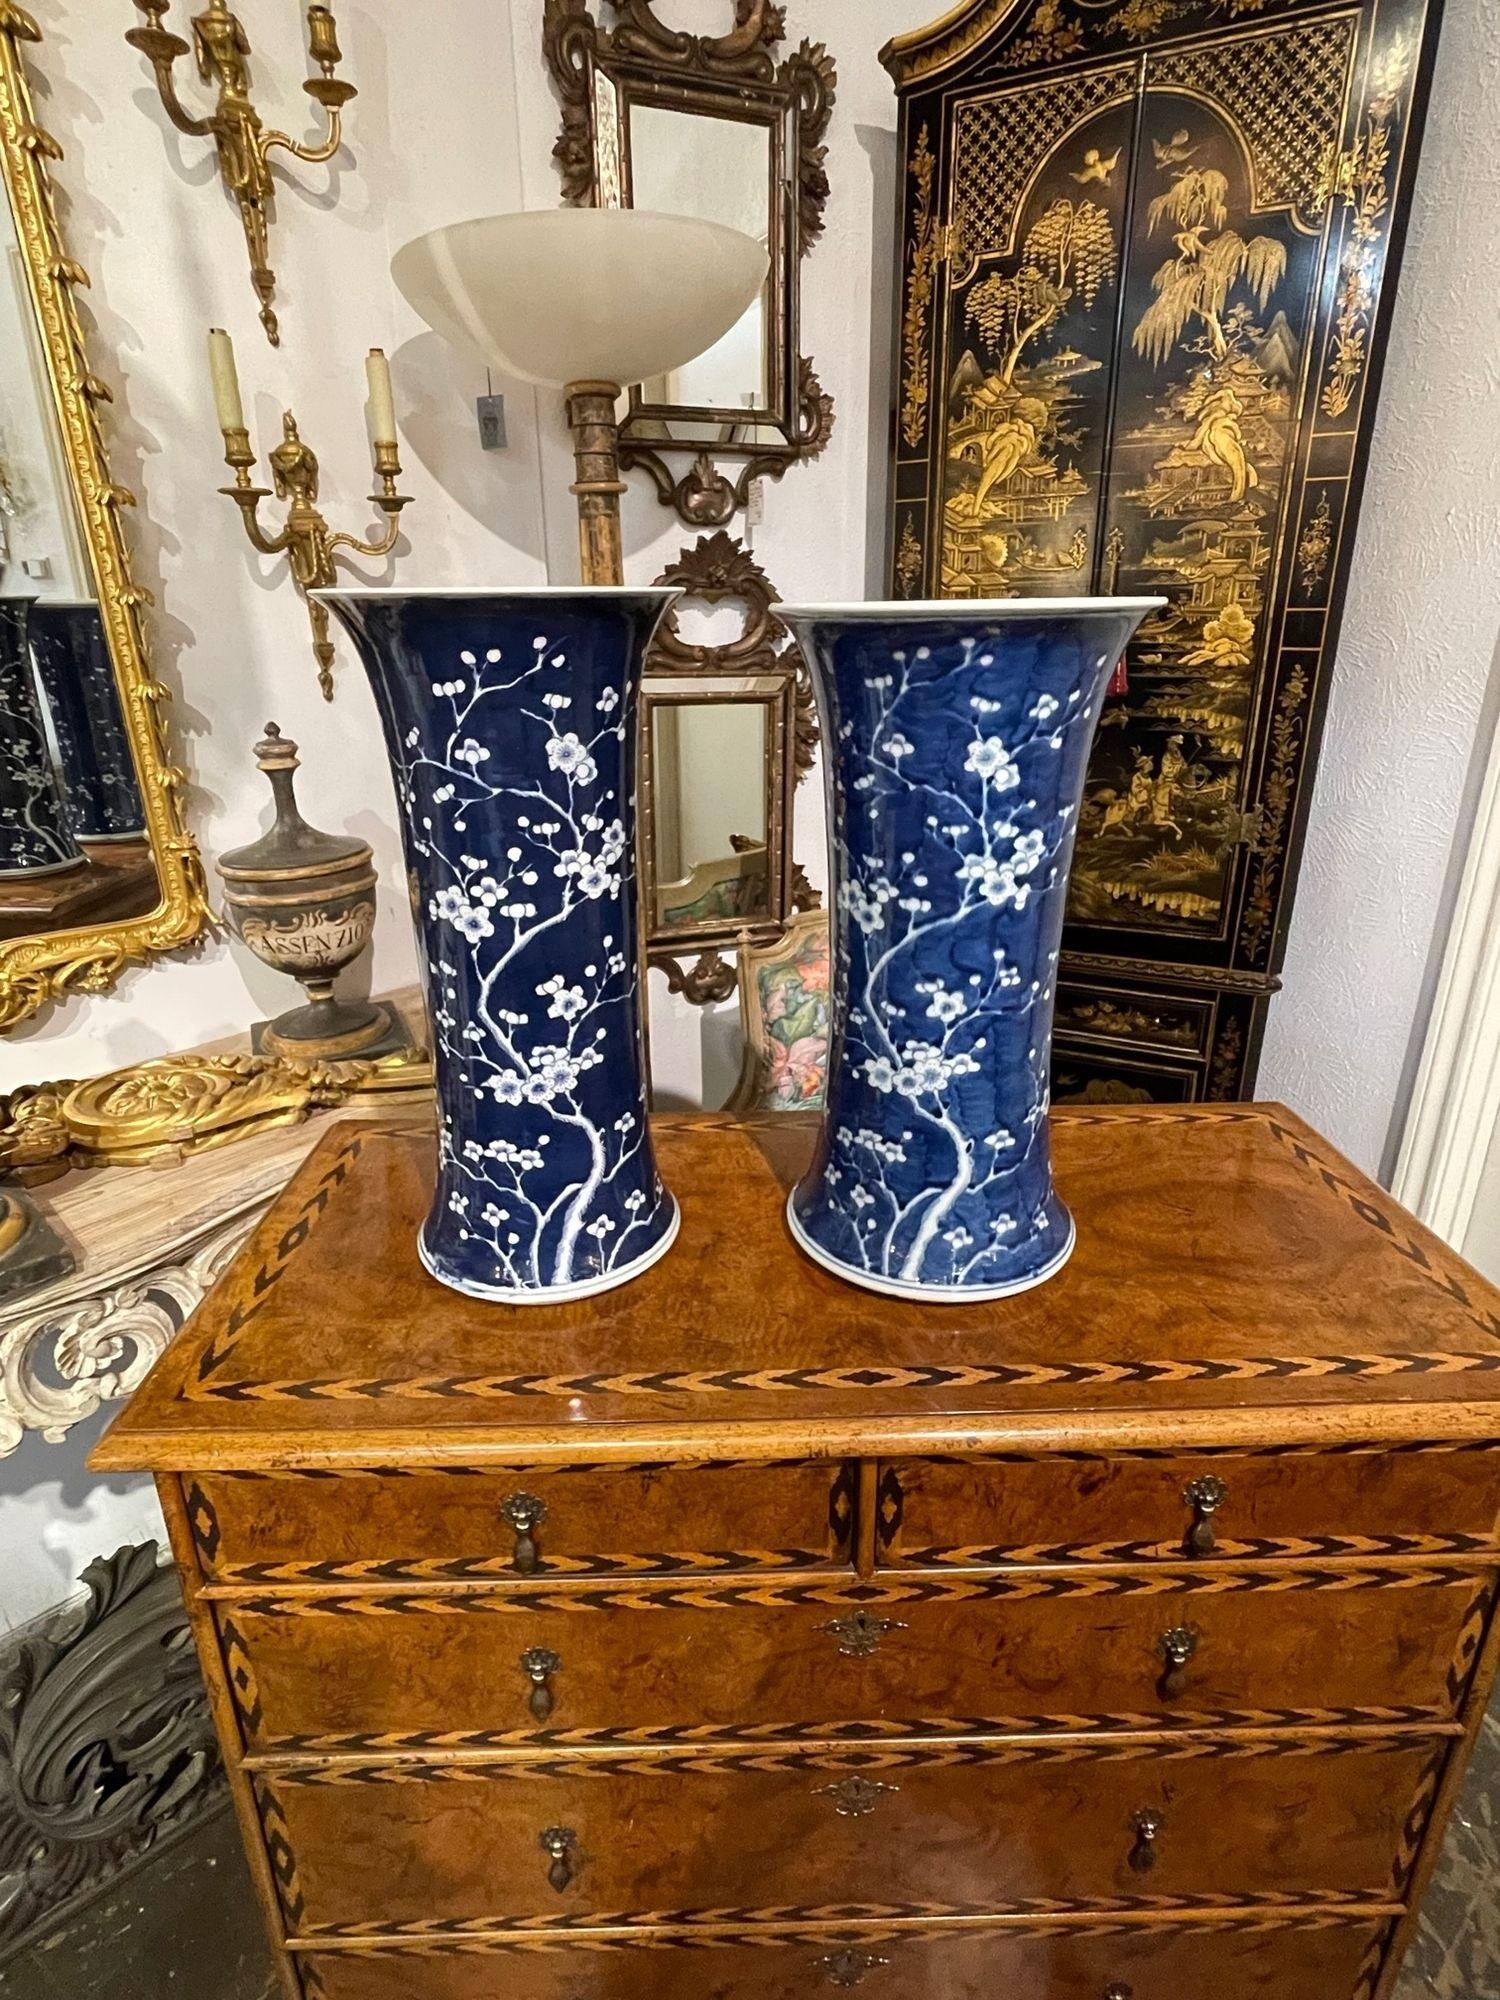 Fine pair of vintage chinese blue and white porcelain vases. Very pretty floral pattern. A lovely accessory for a fine home. These would also make a nice gift!!